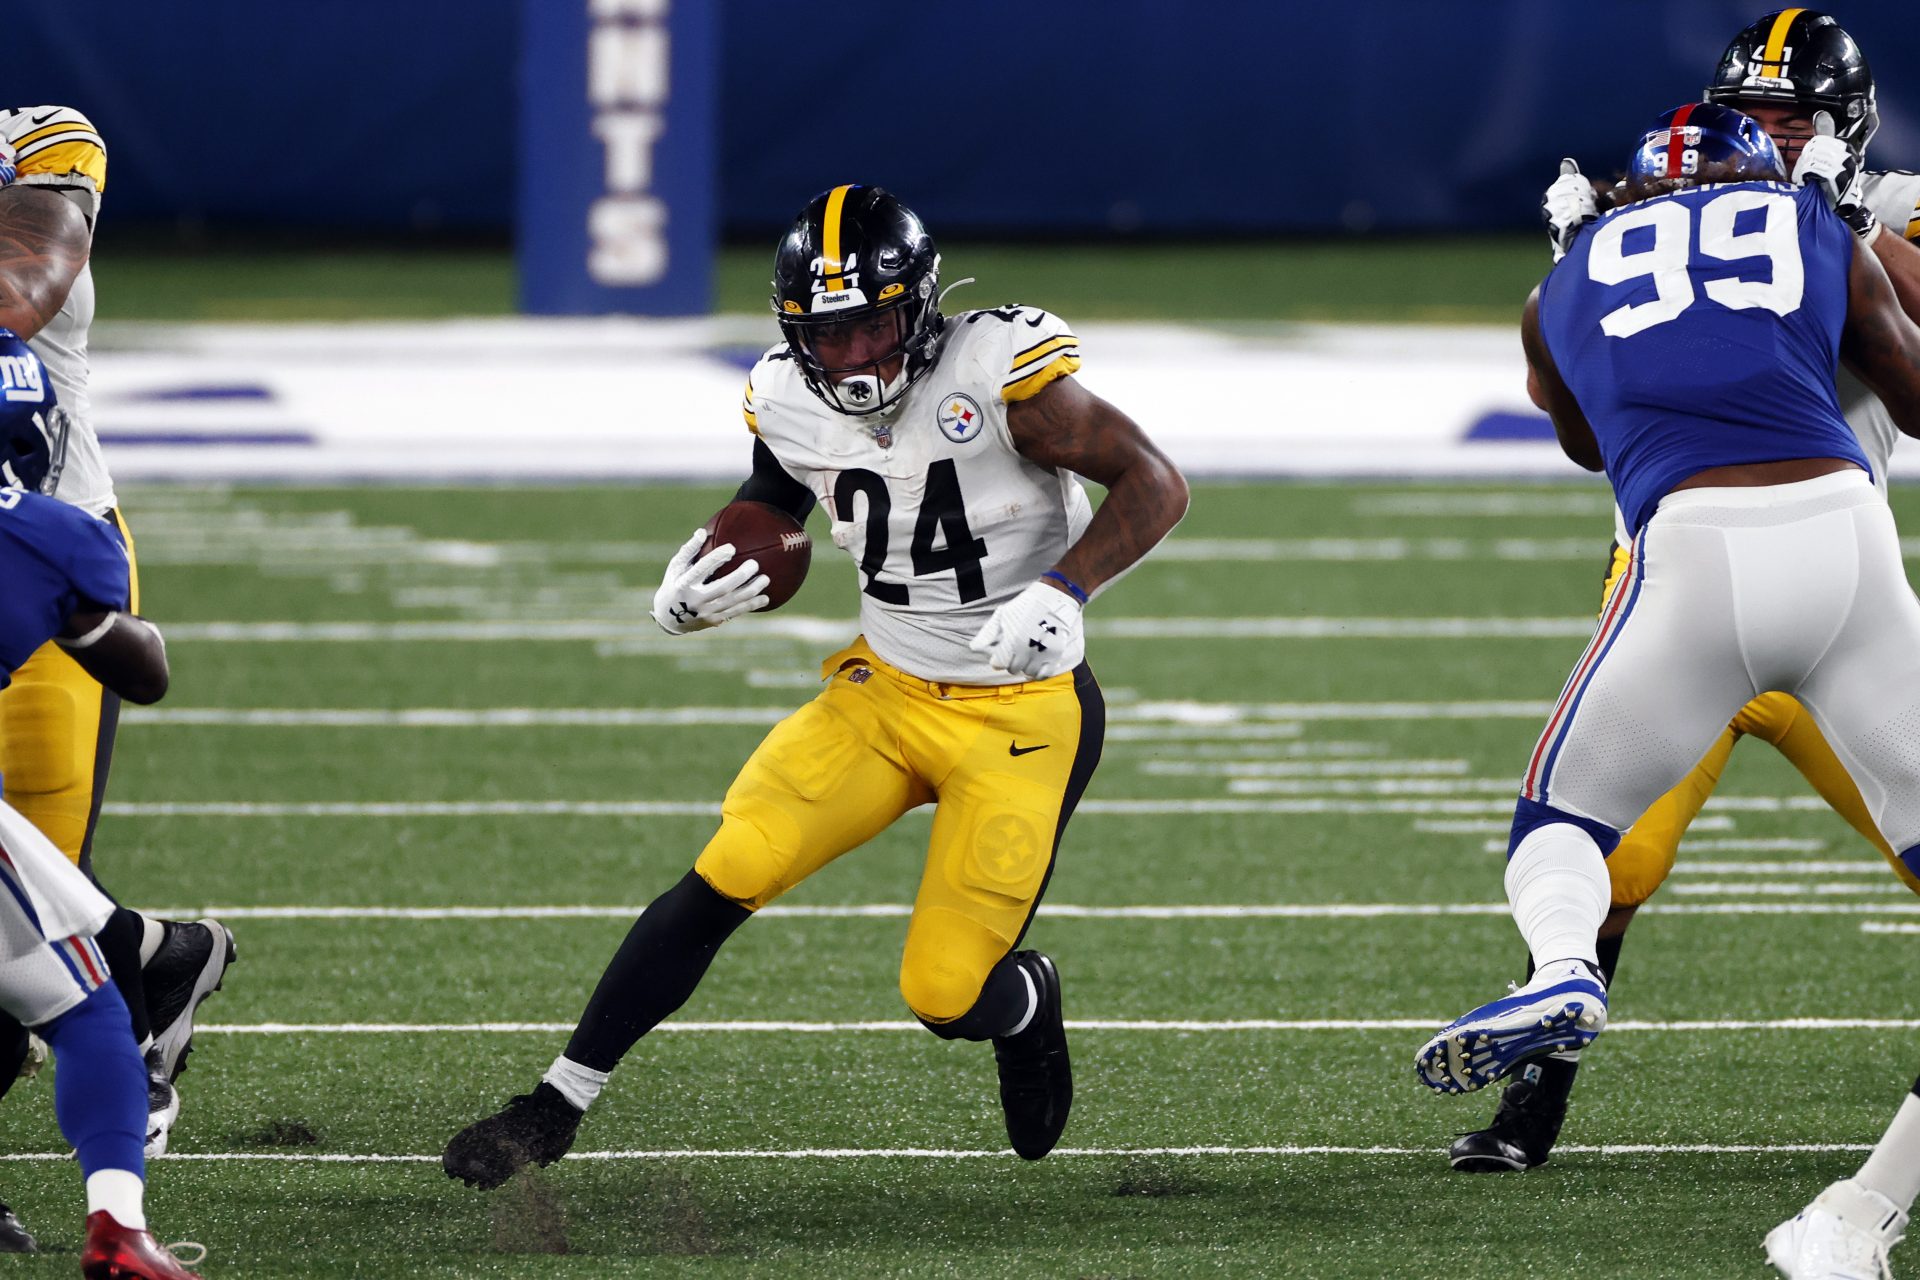 Pittsburgh Steelers running back Benny Snell (24) rushes against the New York Giants during an NFL football game, Monday, Sept. 14, 2020, in East Rutherford, N.J.